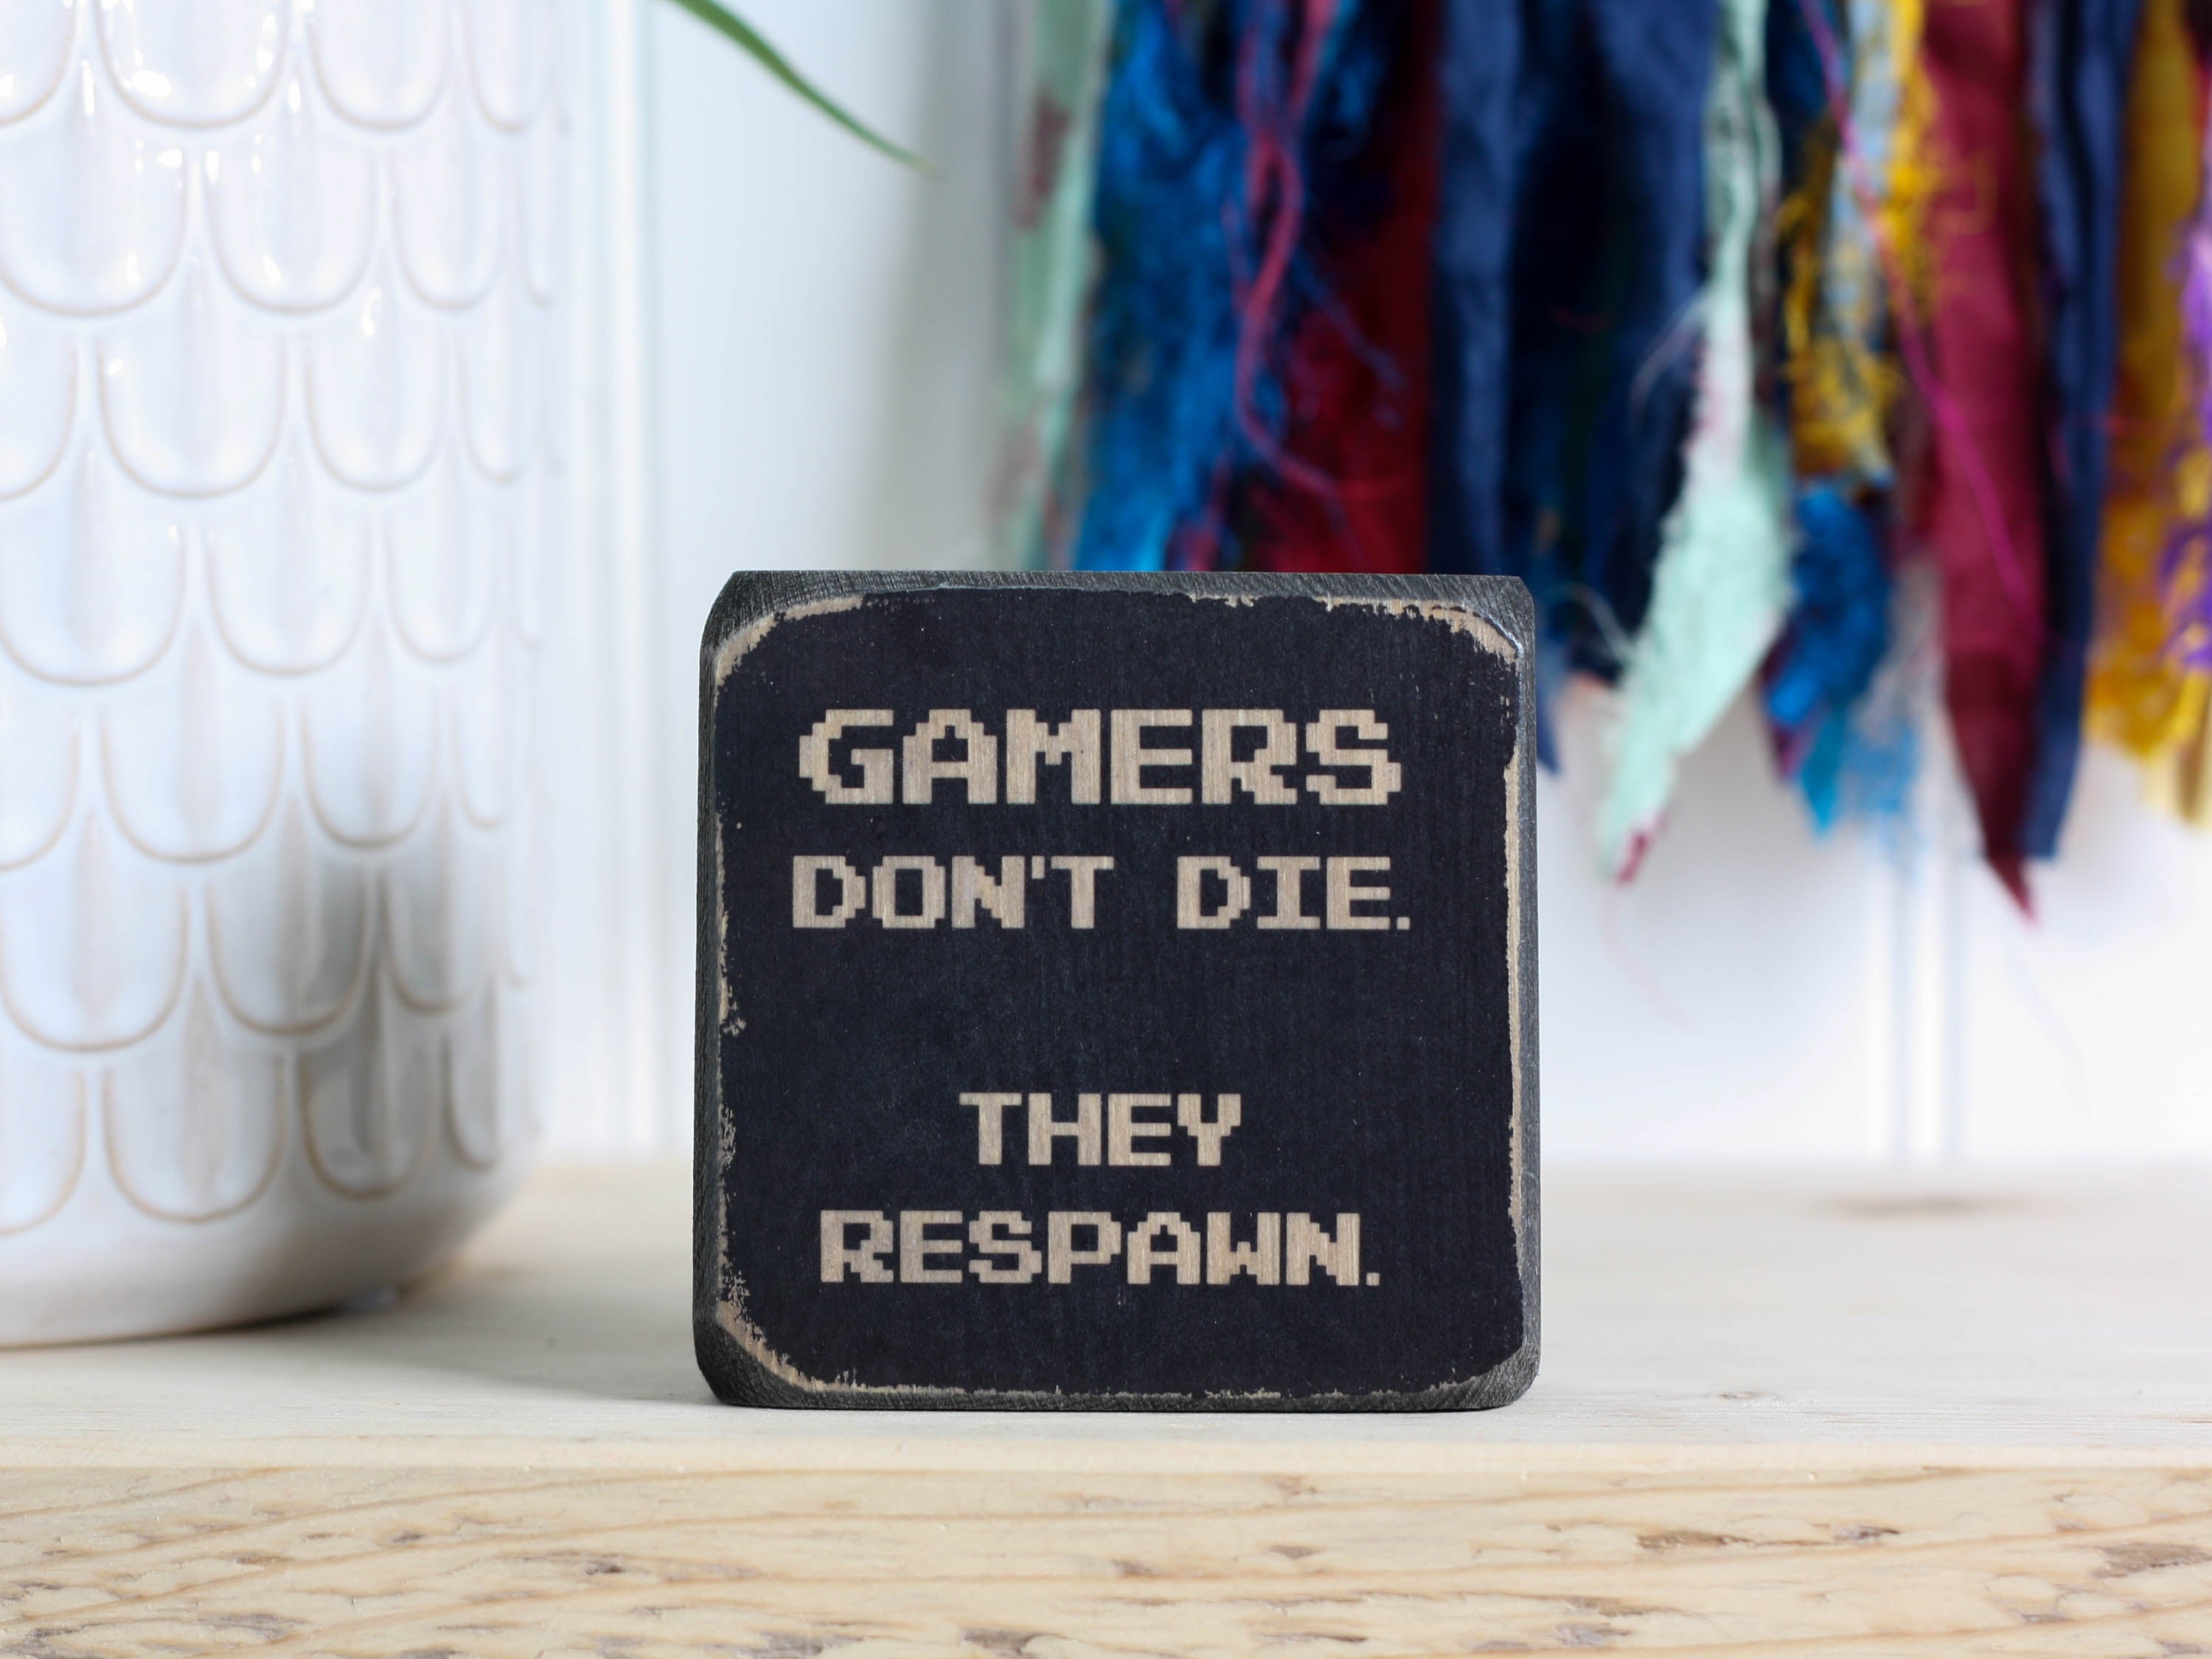 Small wood sign in distressed black with the saying "Gamers don't die. They respawn."